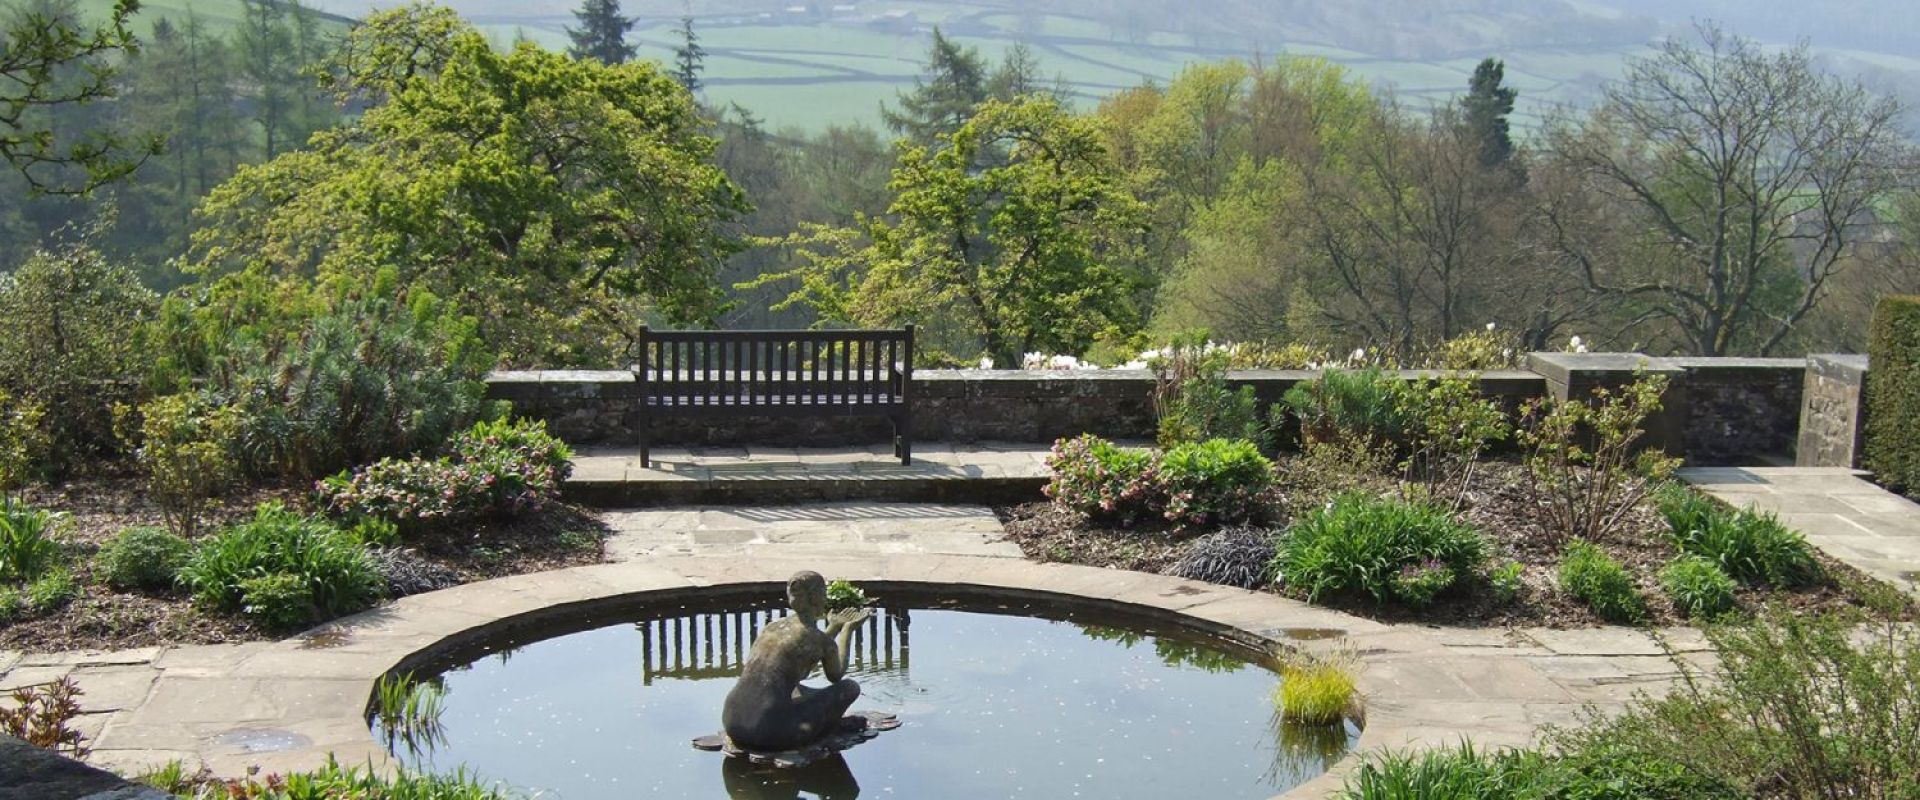 A geometric garden with a central circular pond looks out over a Yorkshire landscape.